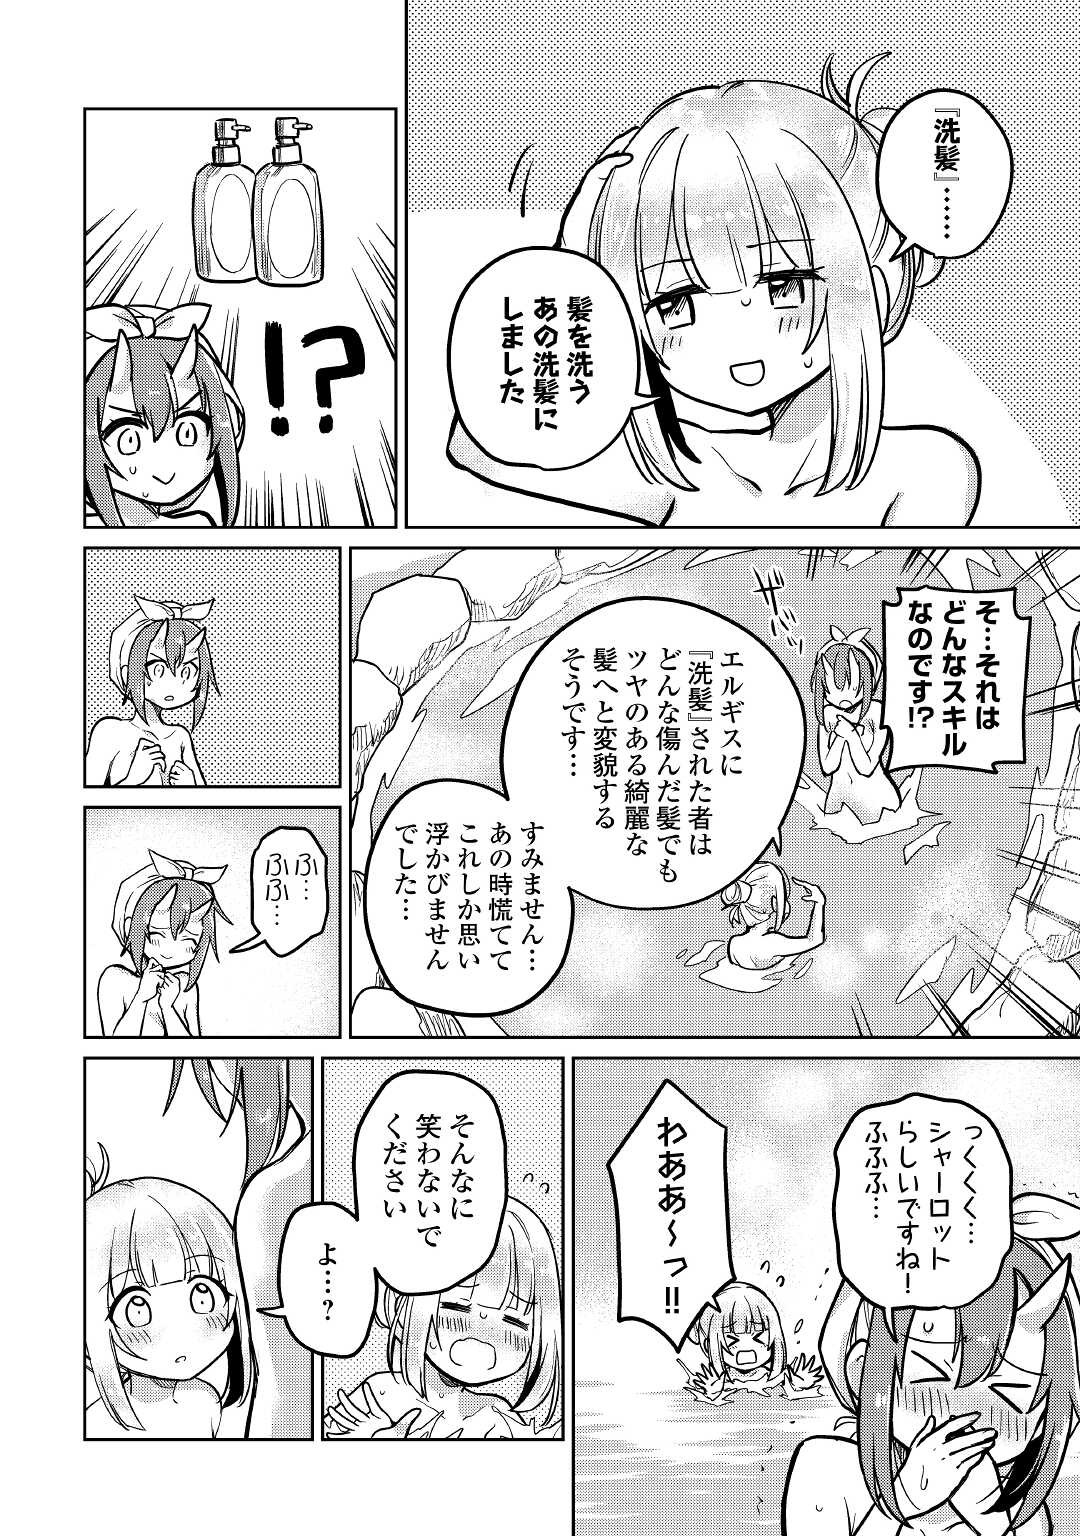 The Former Structural Researcher’s Story of Otherworldly Adventure 第41話 - Page 12